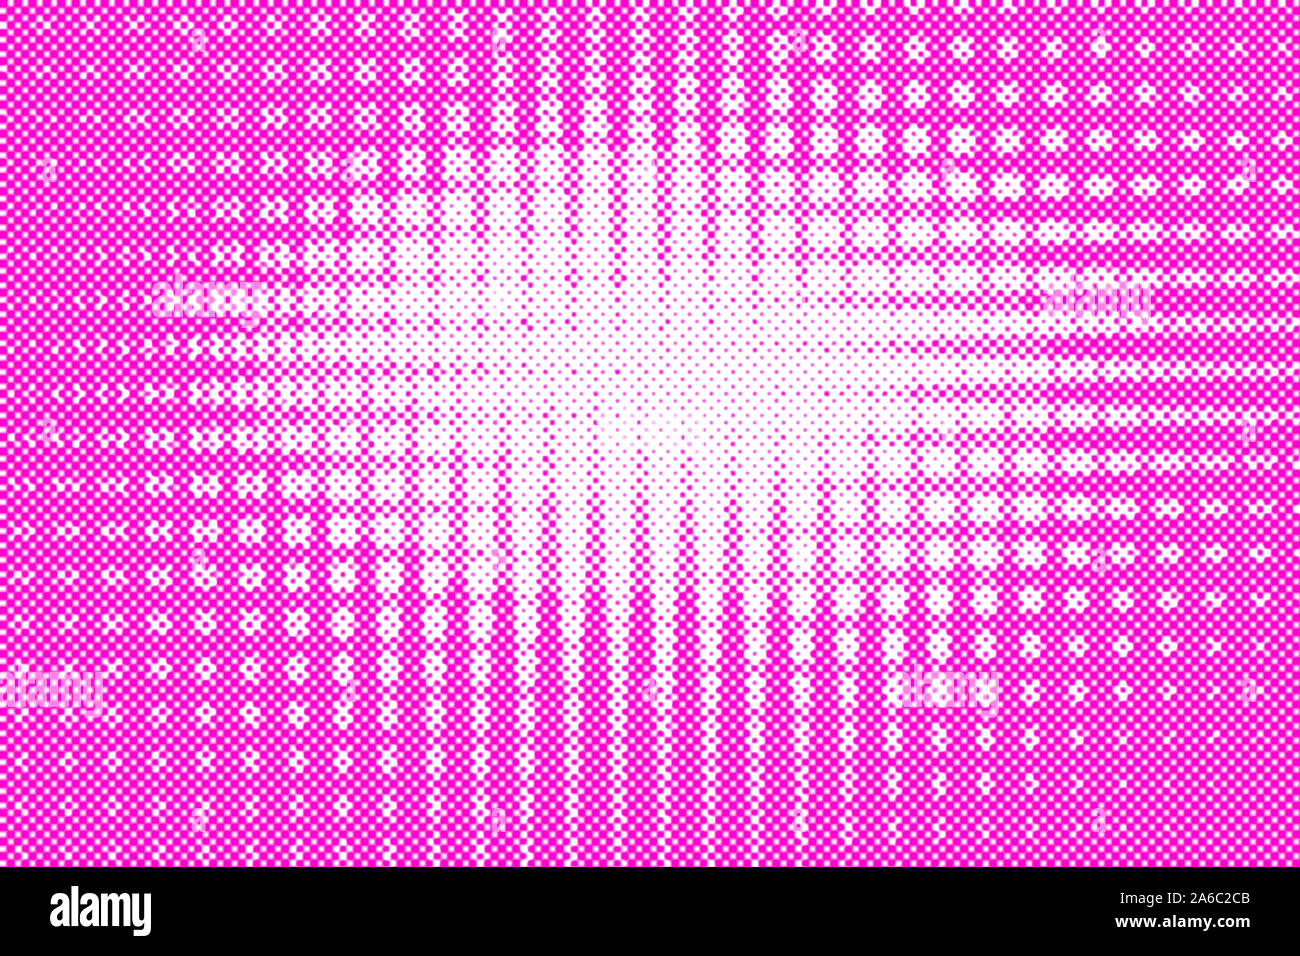 An abstract pink halftone background image. Stock Photo